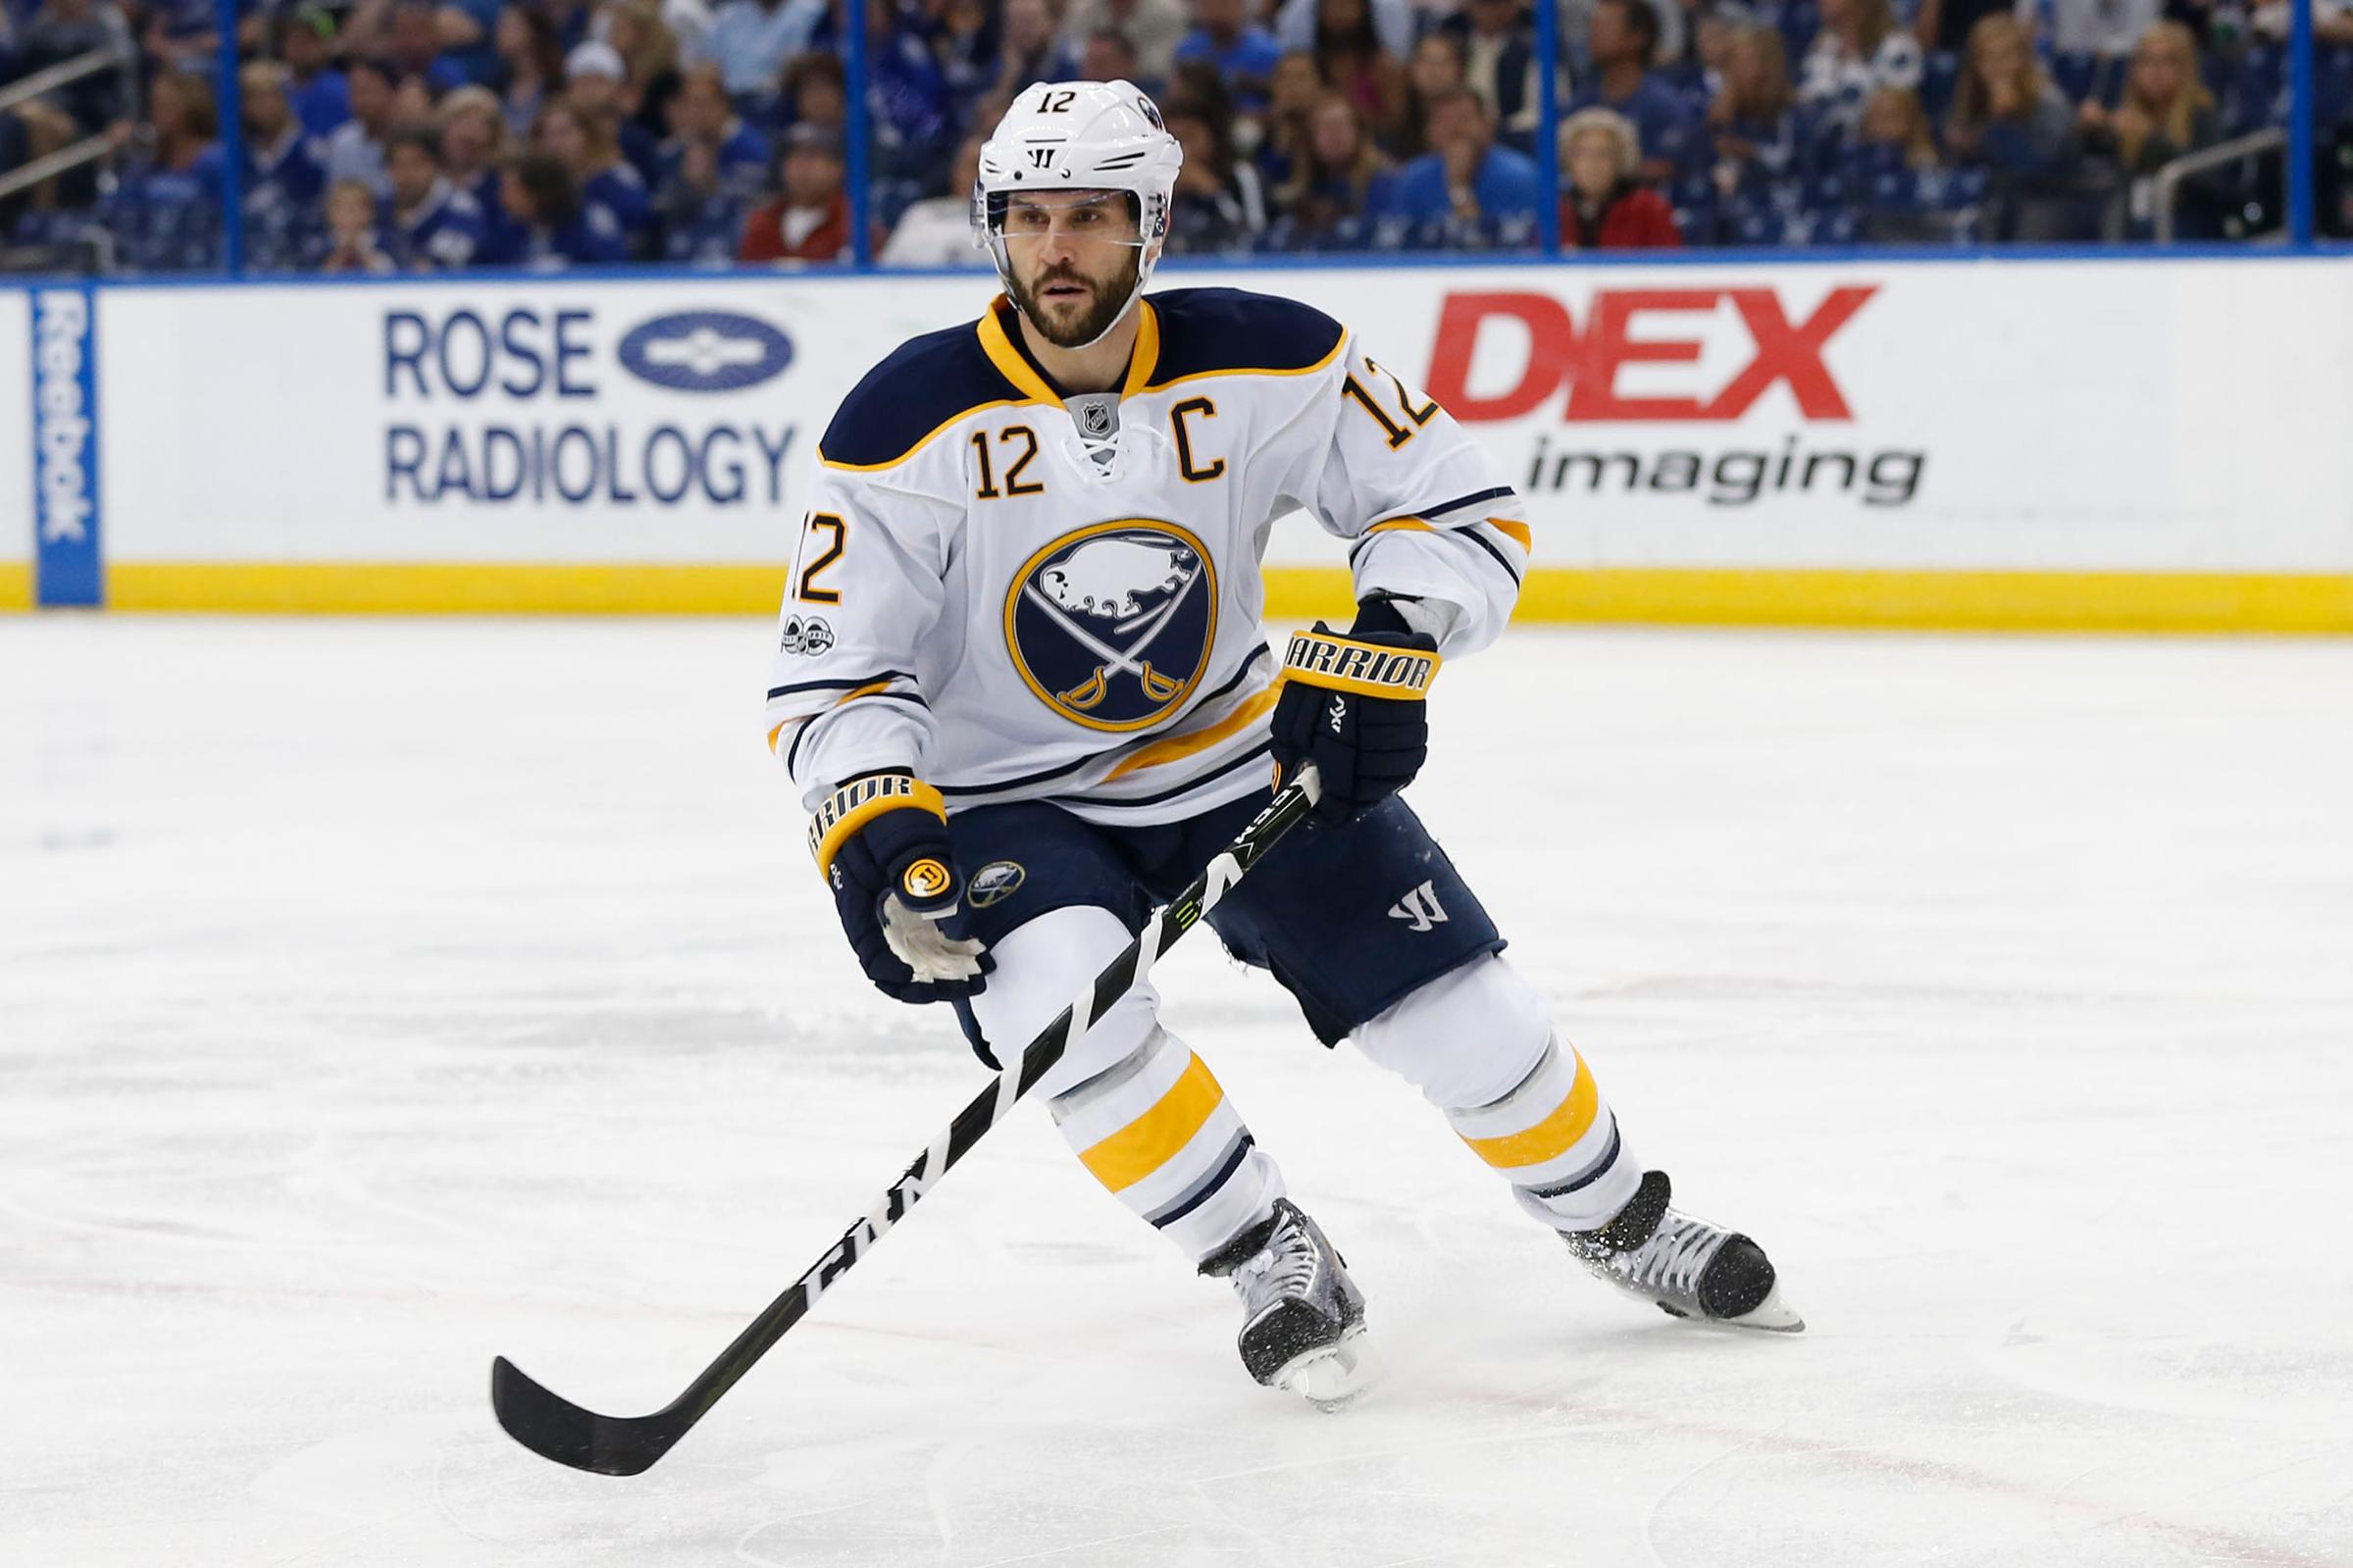 Buffalo Sabres right wing Brian Gionta skates in the 1st period of the NHL game between the Buffalo Sabres and Tampa Bay Lightning on April 09, 2017.